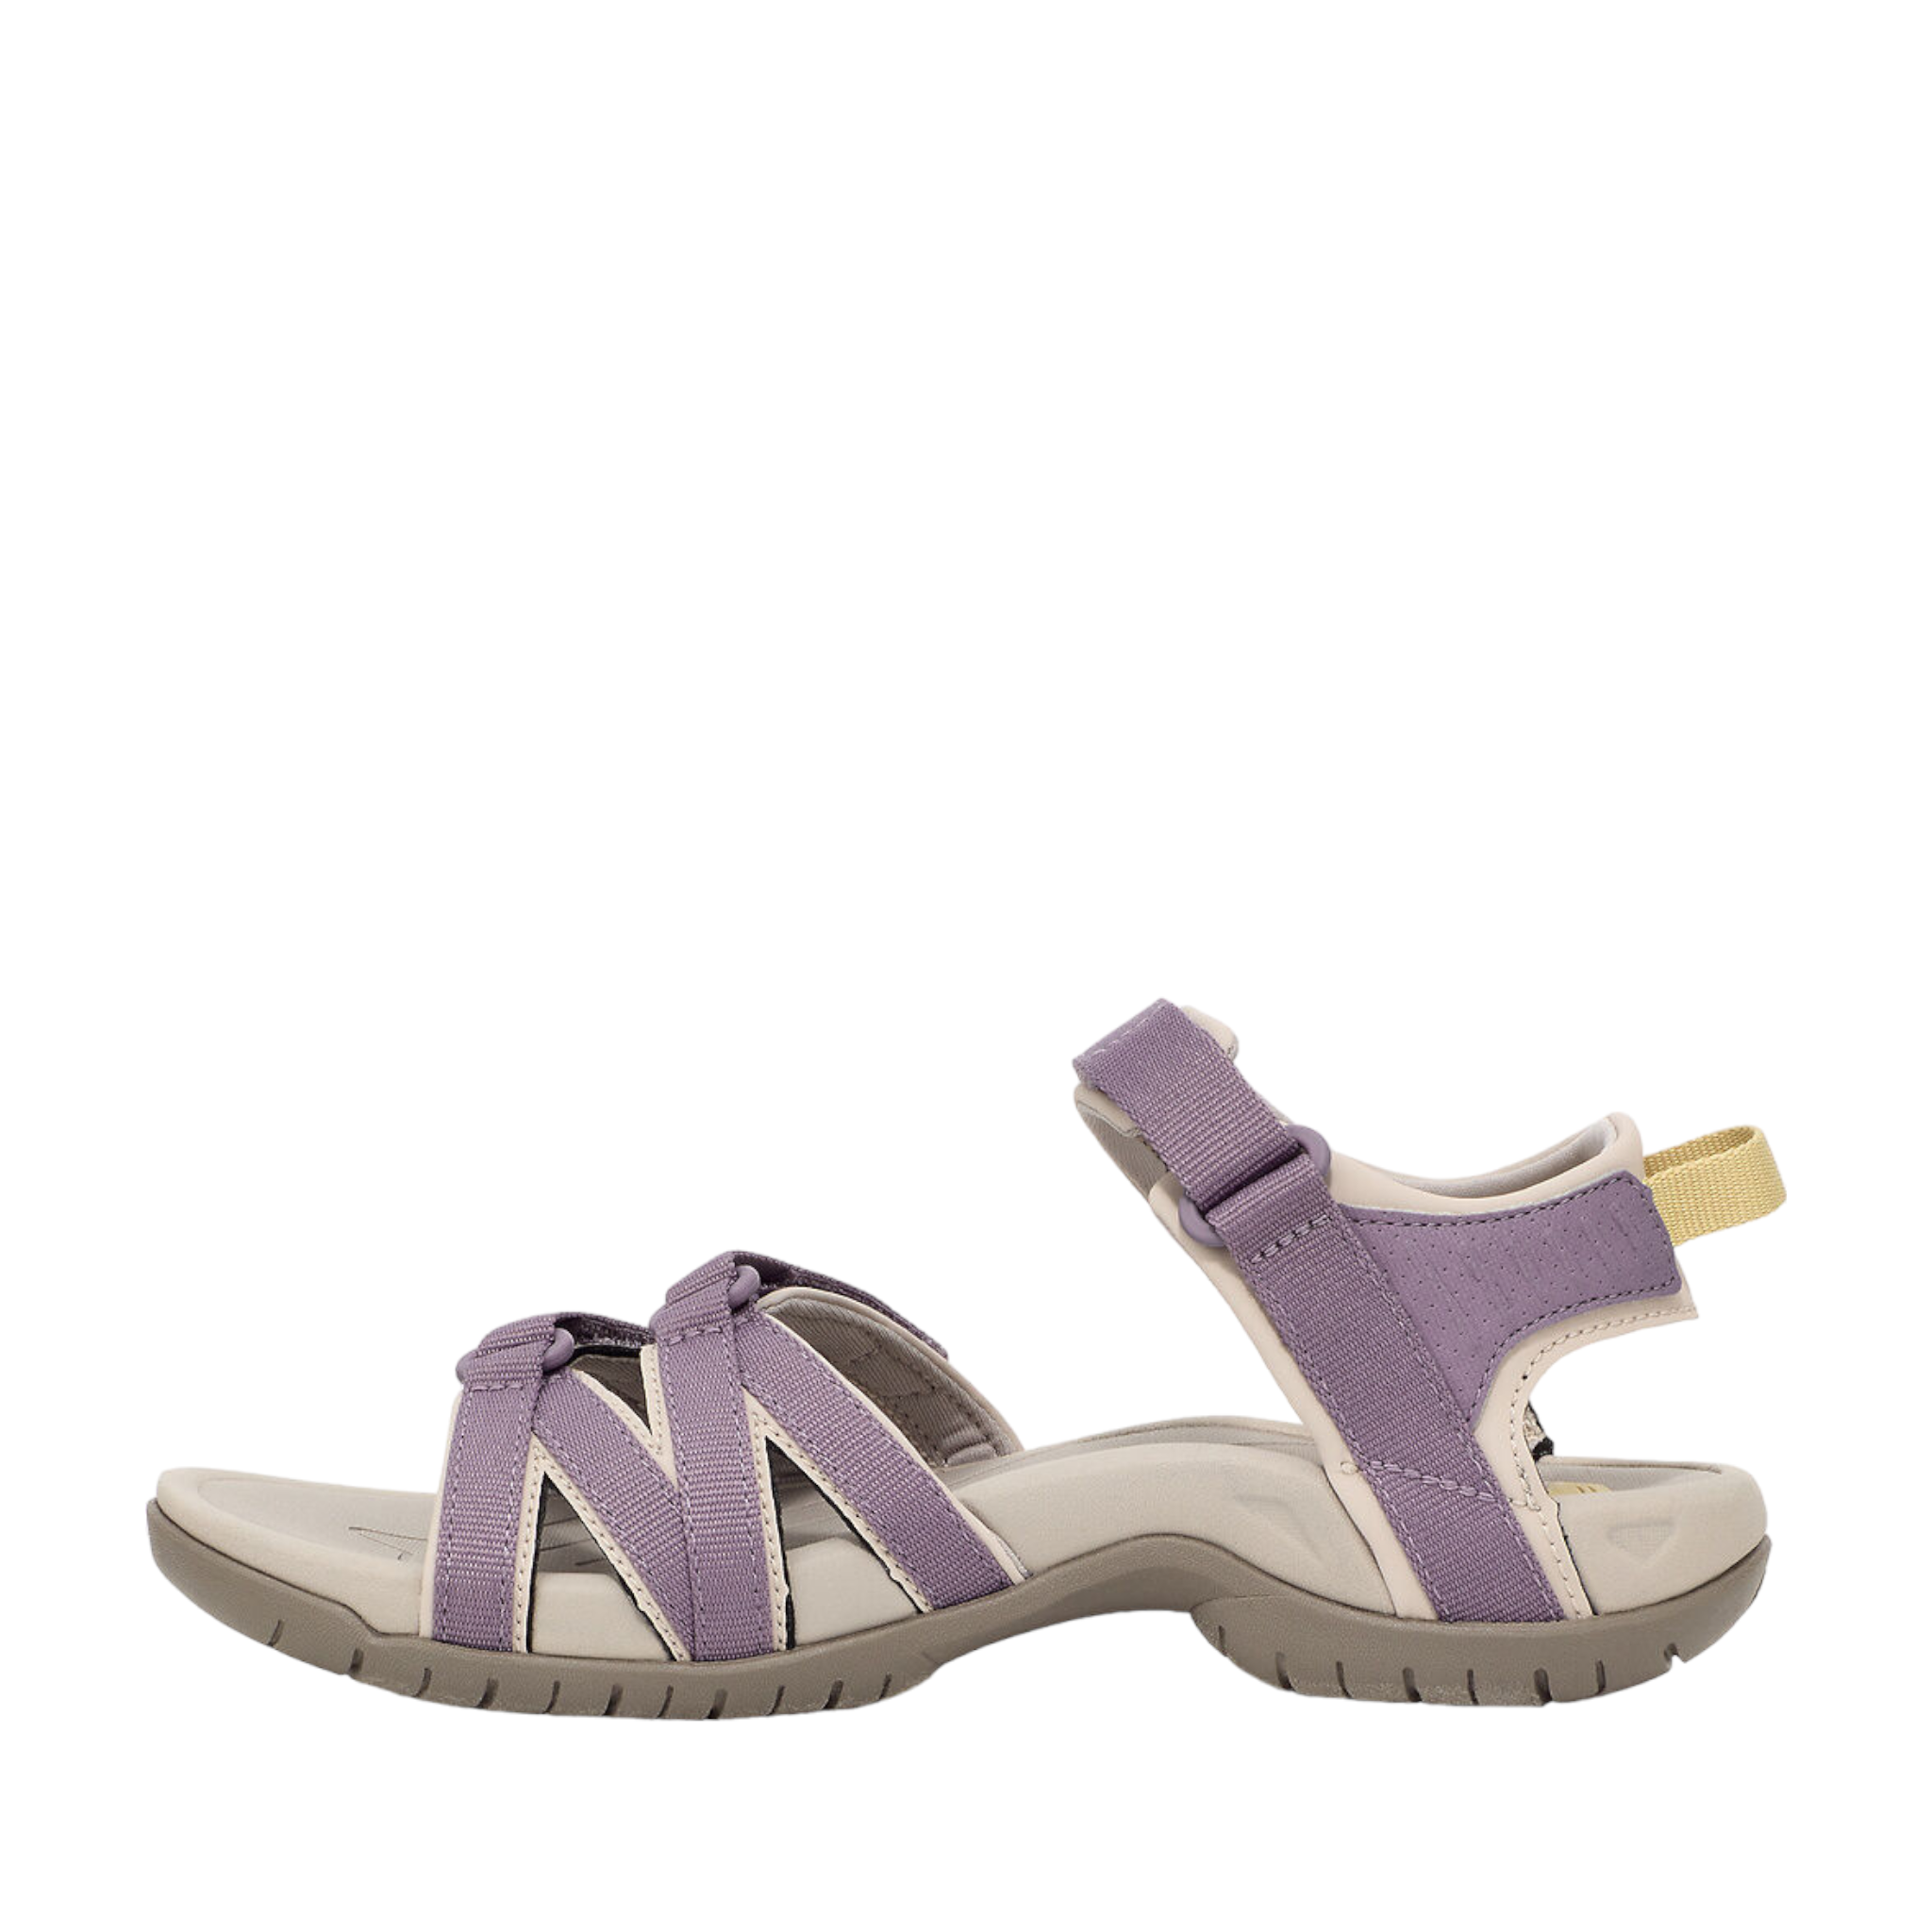 Shop W Tirra - with shoe&amp;me - from Teva - Sandals - Sandals, Summer, Womens